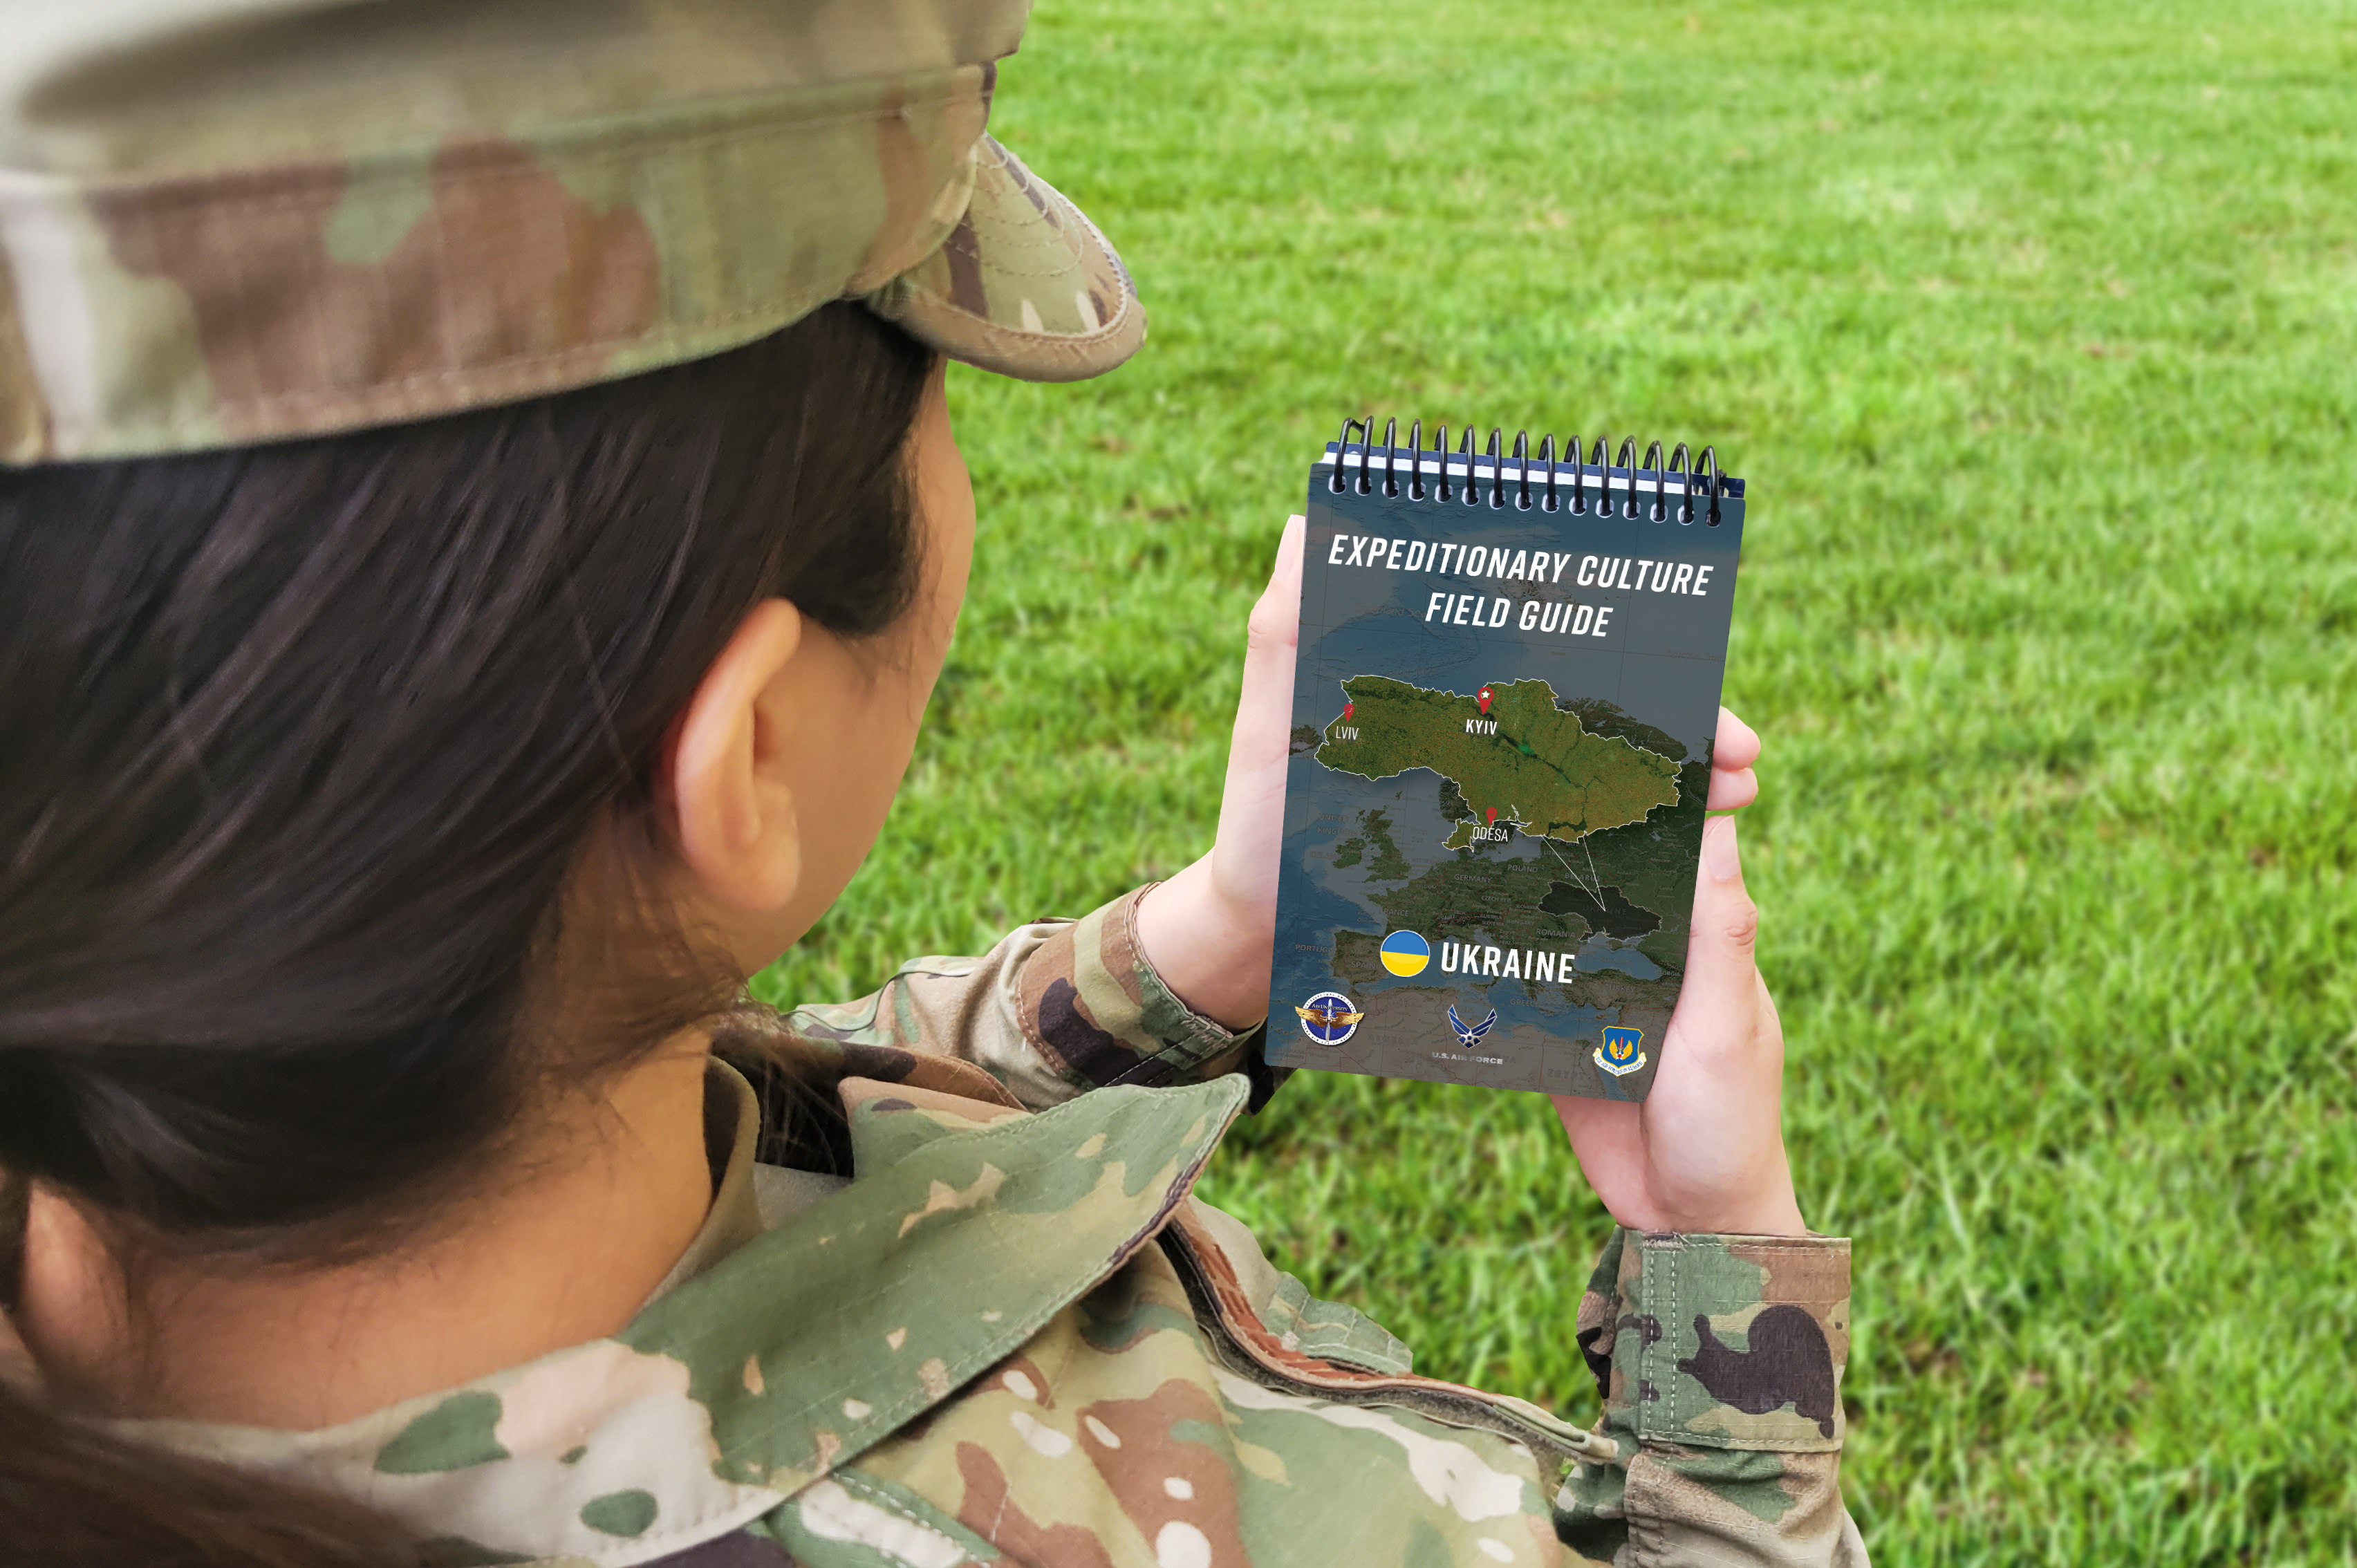 Airman holds field guide in their hands